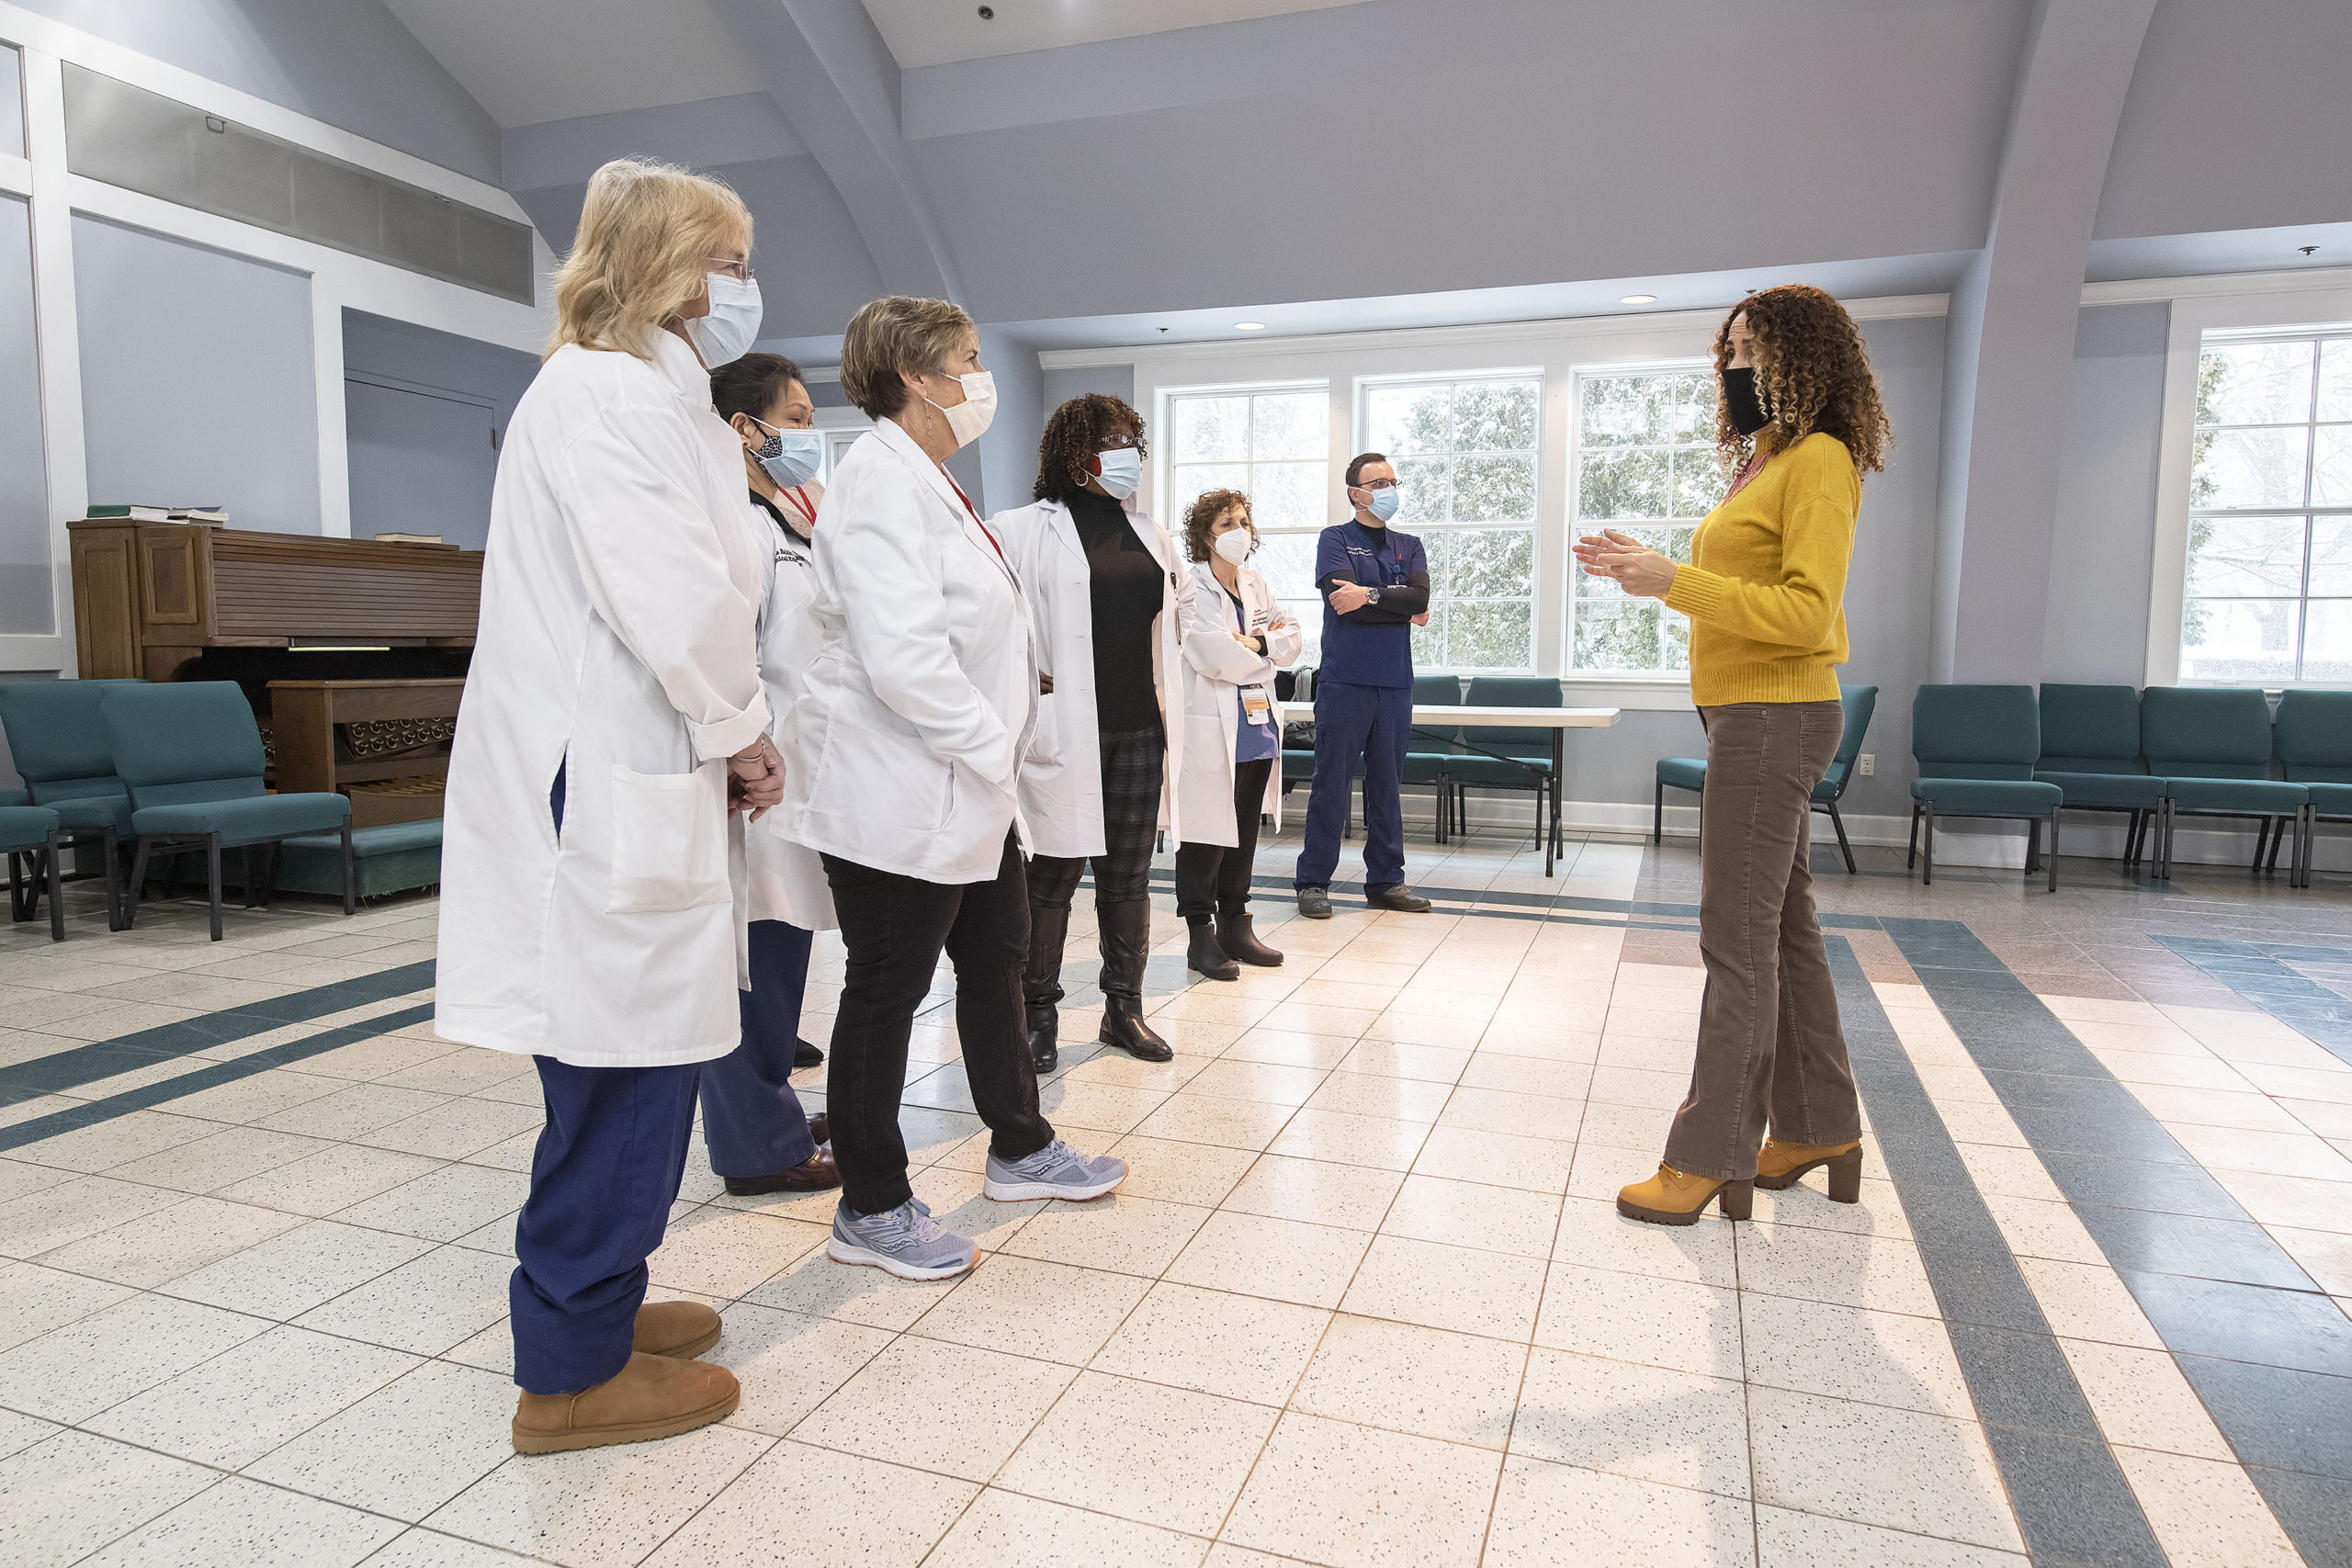 OLA  (Organización Latino-Americana) Executive Director Minerva Perez consults with Stony Brook Hospital nursing staff prior to the opening of a COVID-19 vaccine POD (Pop Up Dispensary) in the Ryan Dempsey Parrish Hall of the Most Holy Trinity Church in East Hampton on Friday.       MICHAEL HELLER